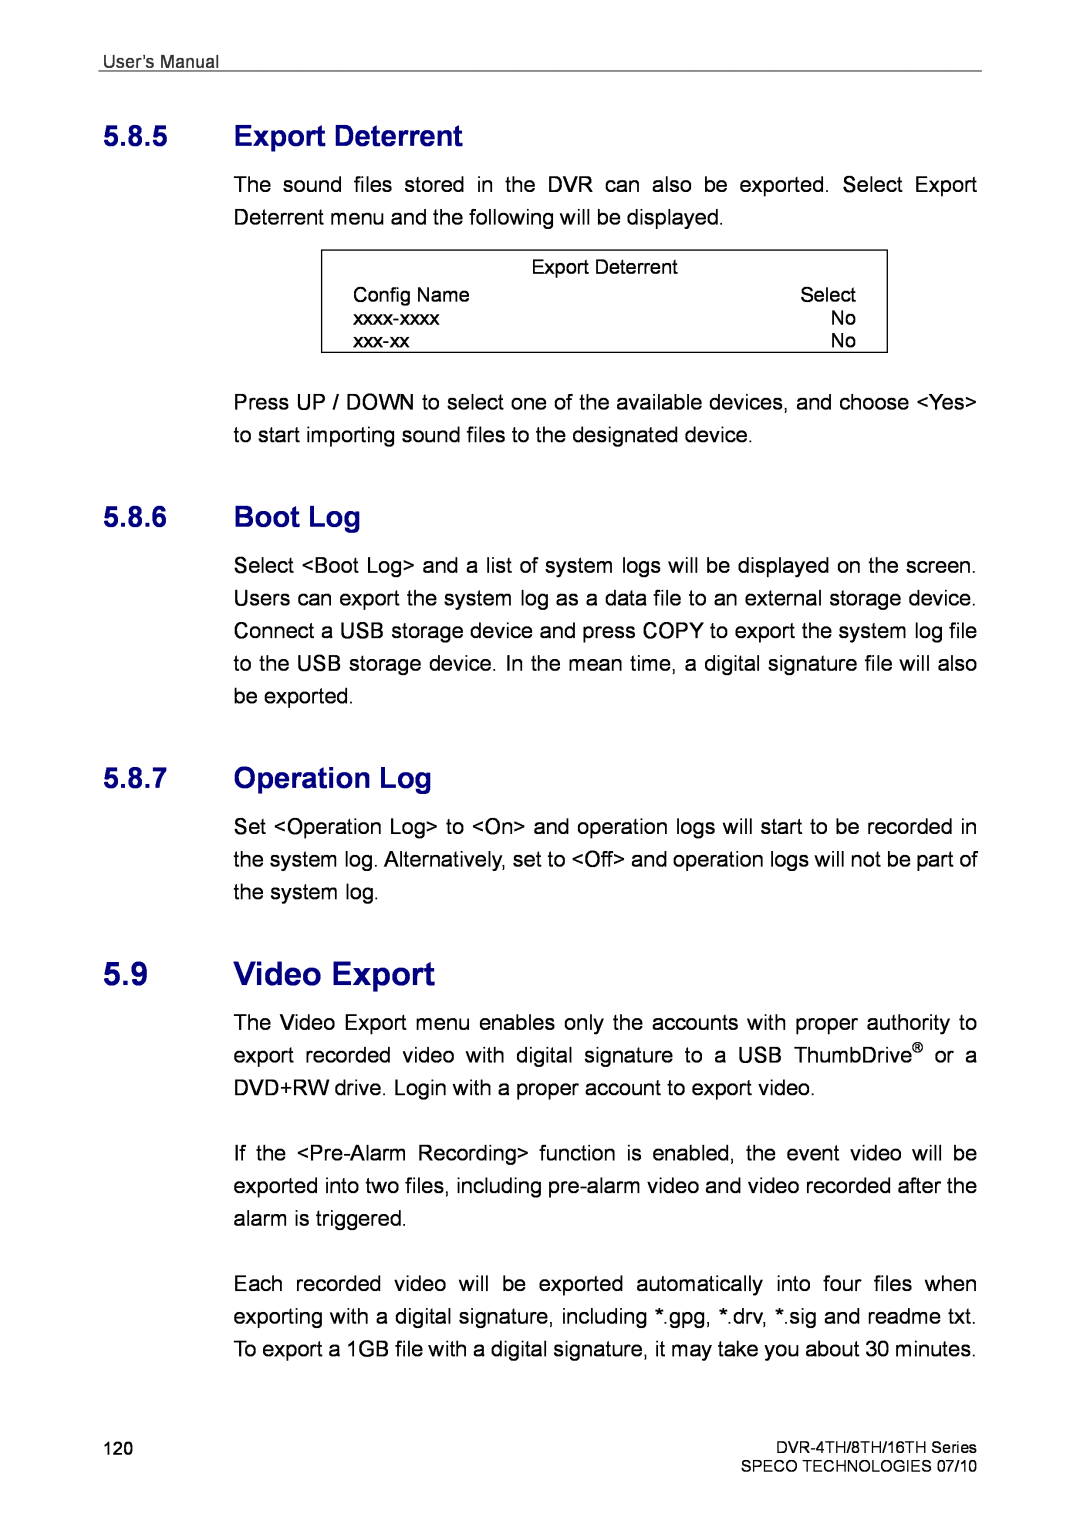 Speco Technologies 4TH, 8TH, 16TH user manual Video Export, Export Deterrent, Boot Log, Operation Log 